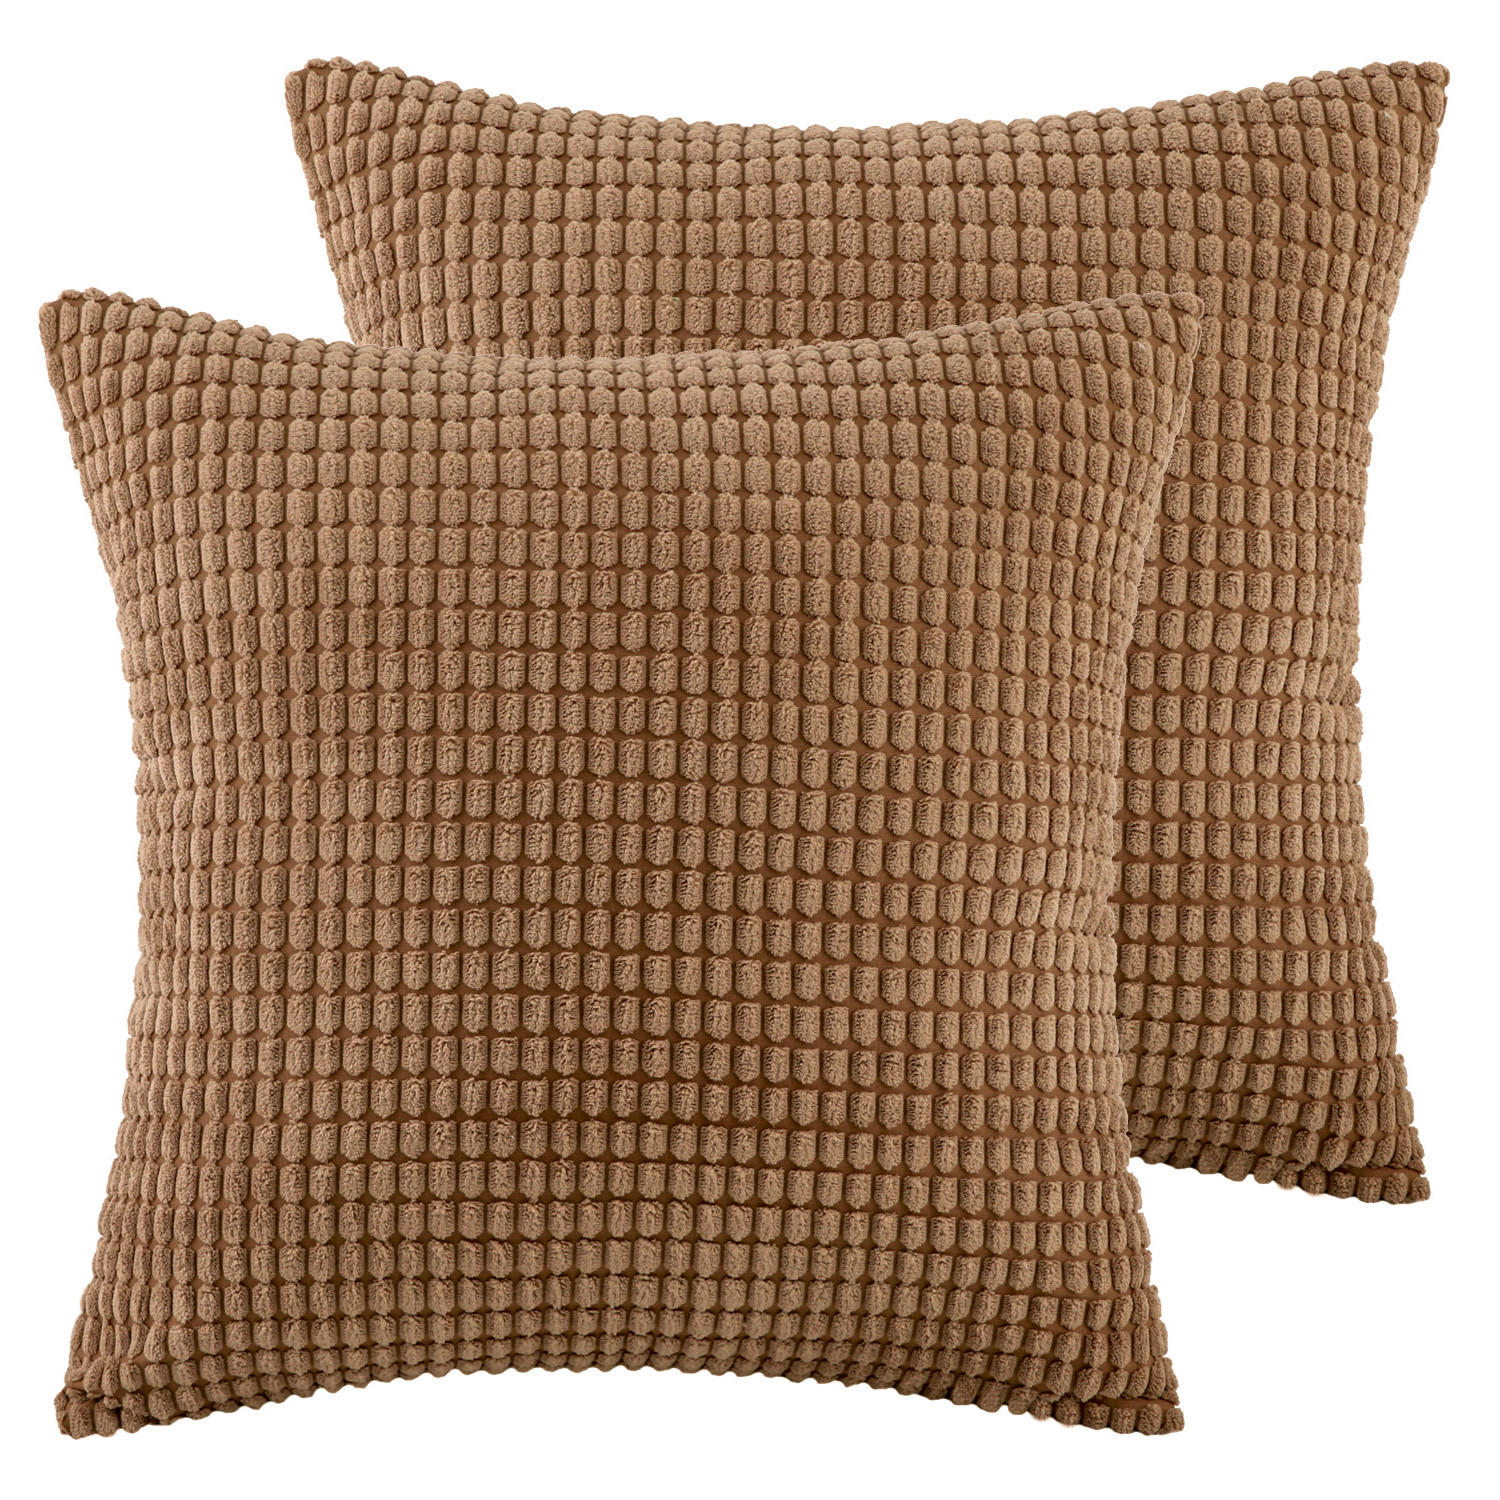 Soft Corduroy Corn Striped Velvet Series Decorative Throw Pillow, 20" x 20", Brown, 2 Pack - image 1 of 5